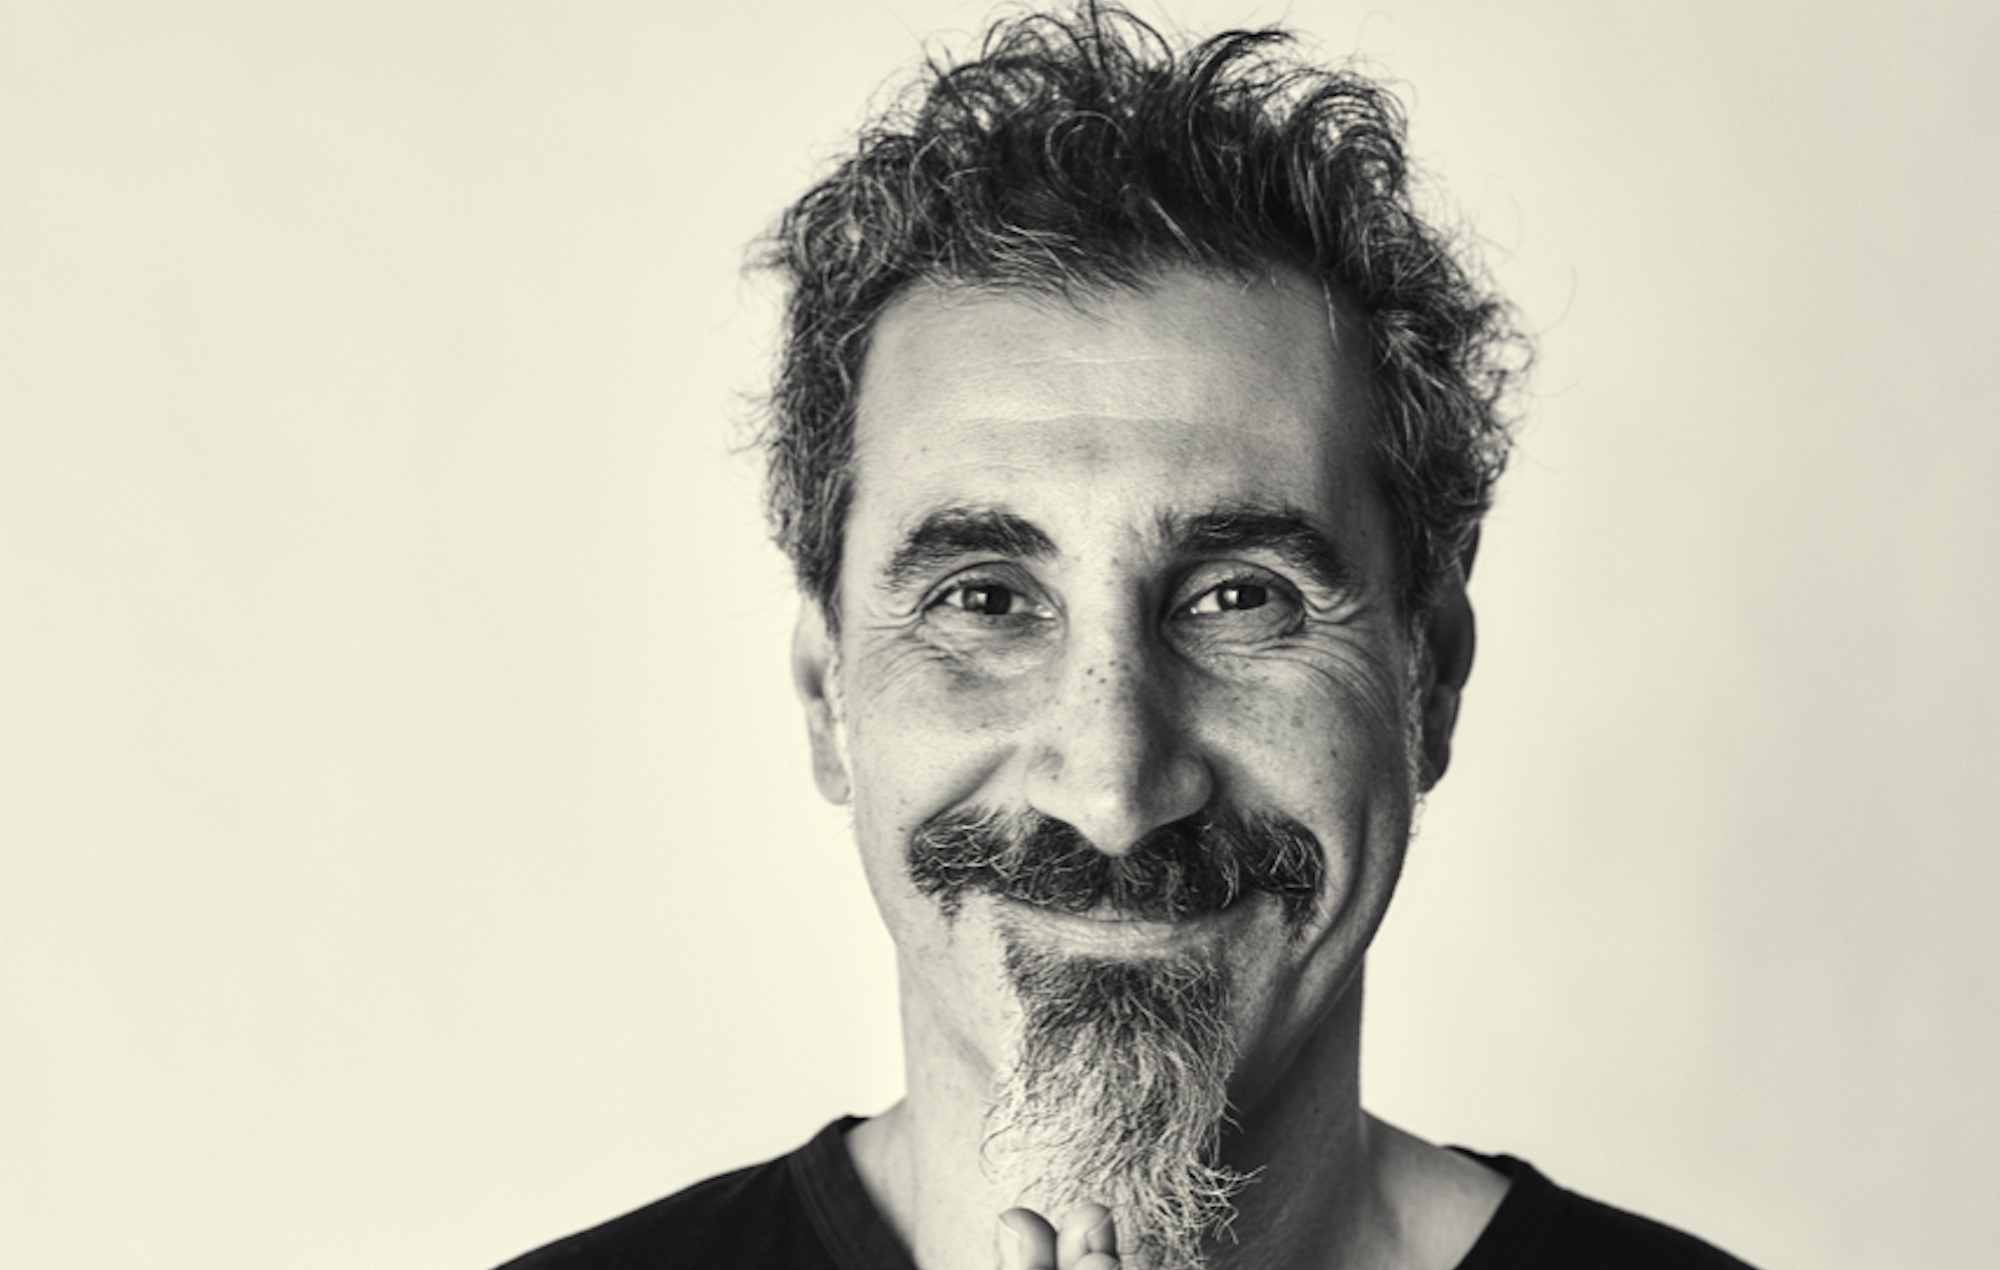 Serj Tankian: “I think the whole world felt some relief that Trump was gone”